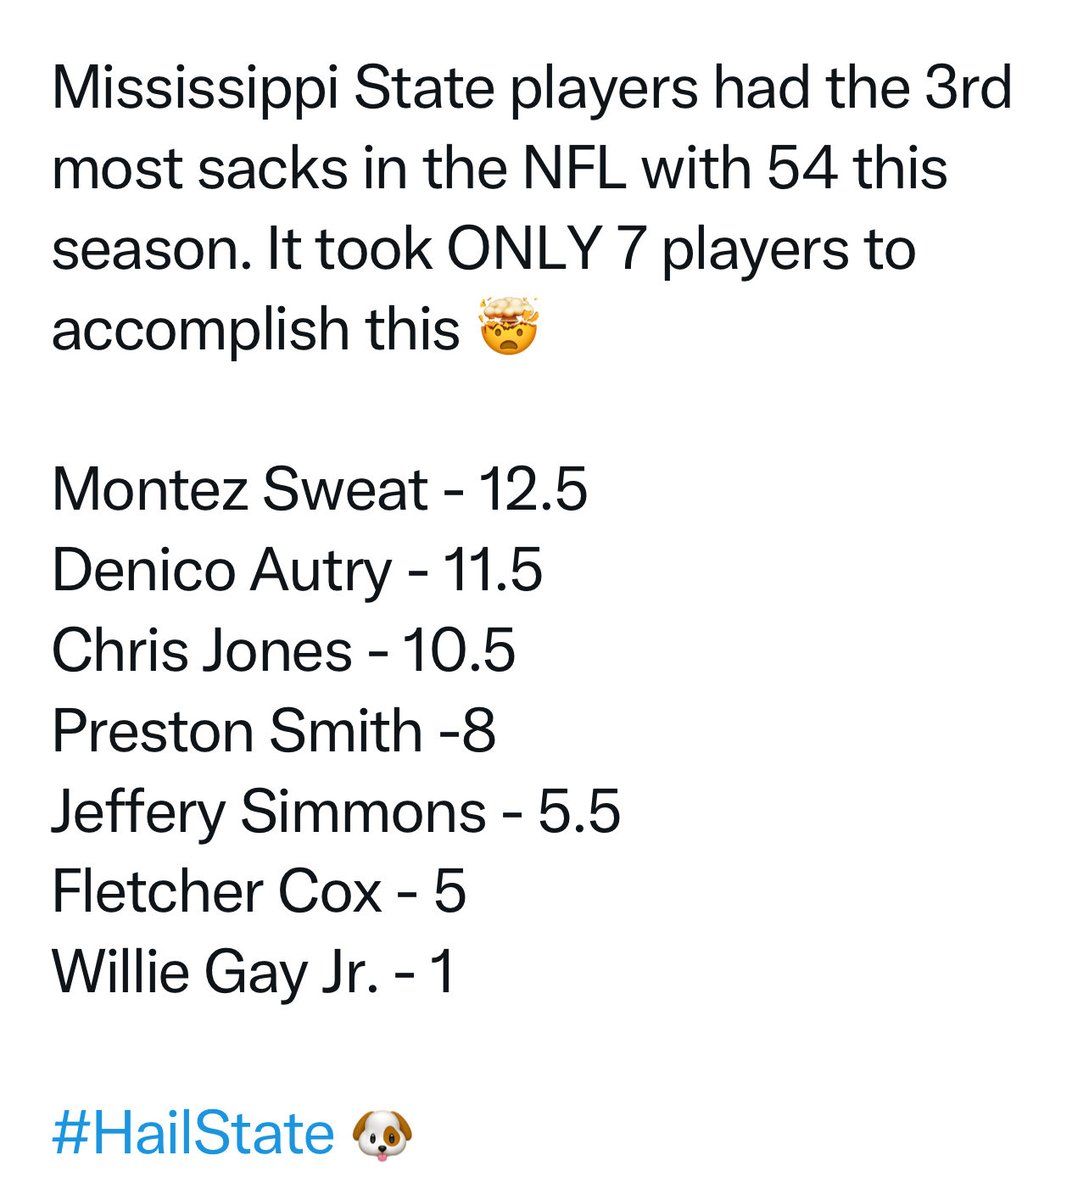 WHY NOT MISSISSIPPI STATE…..WHY NOT DLU!!!!